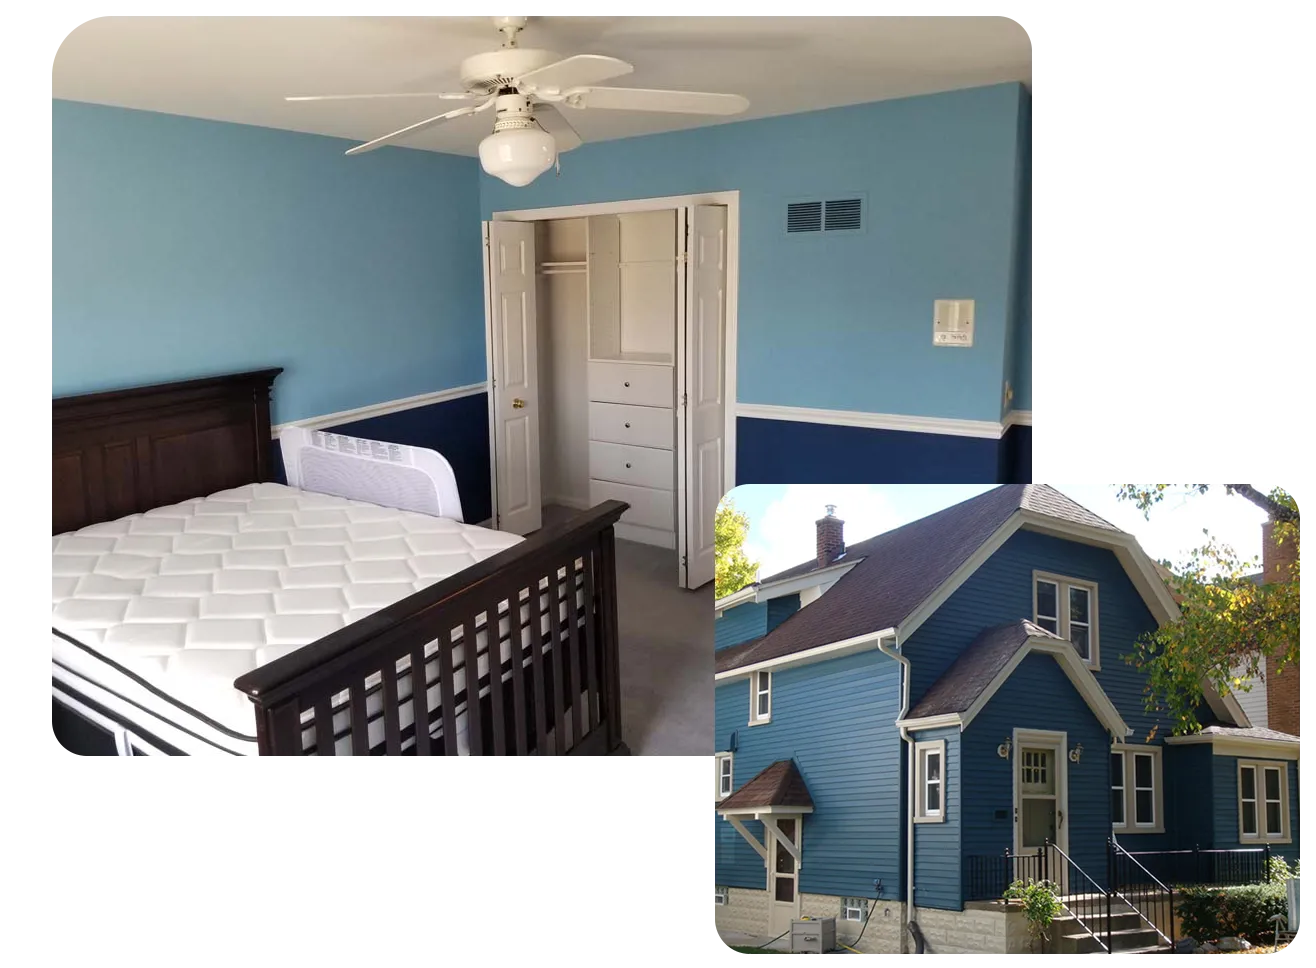 Interior and exterior view of a home painted blue